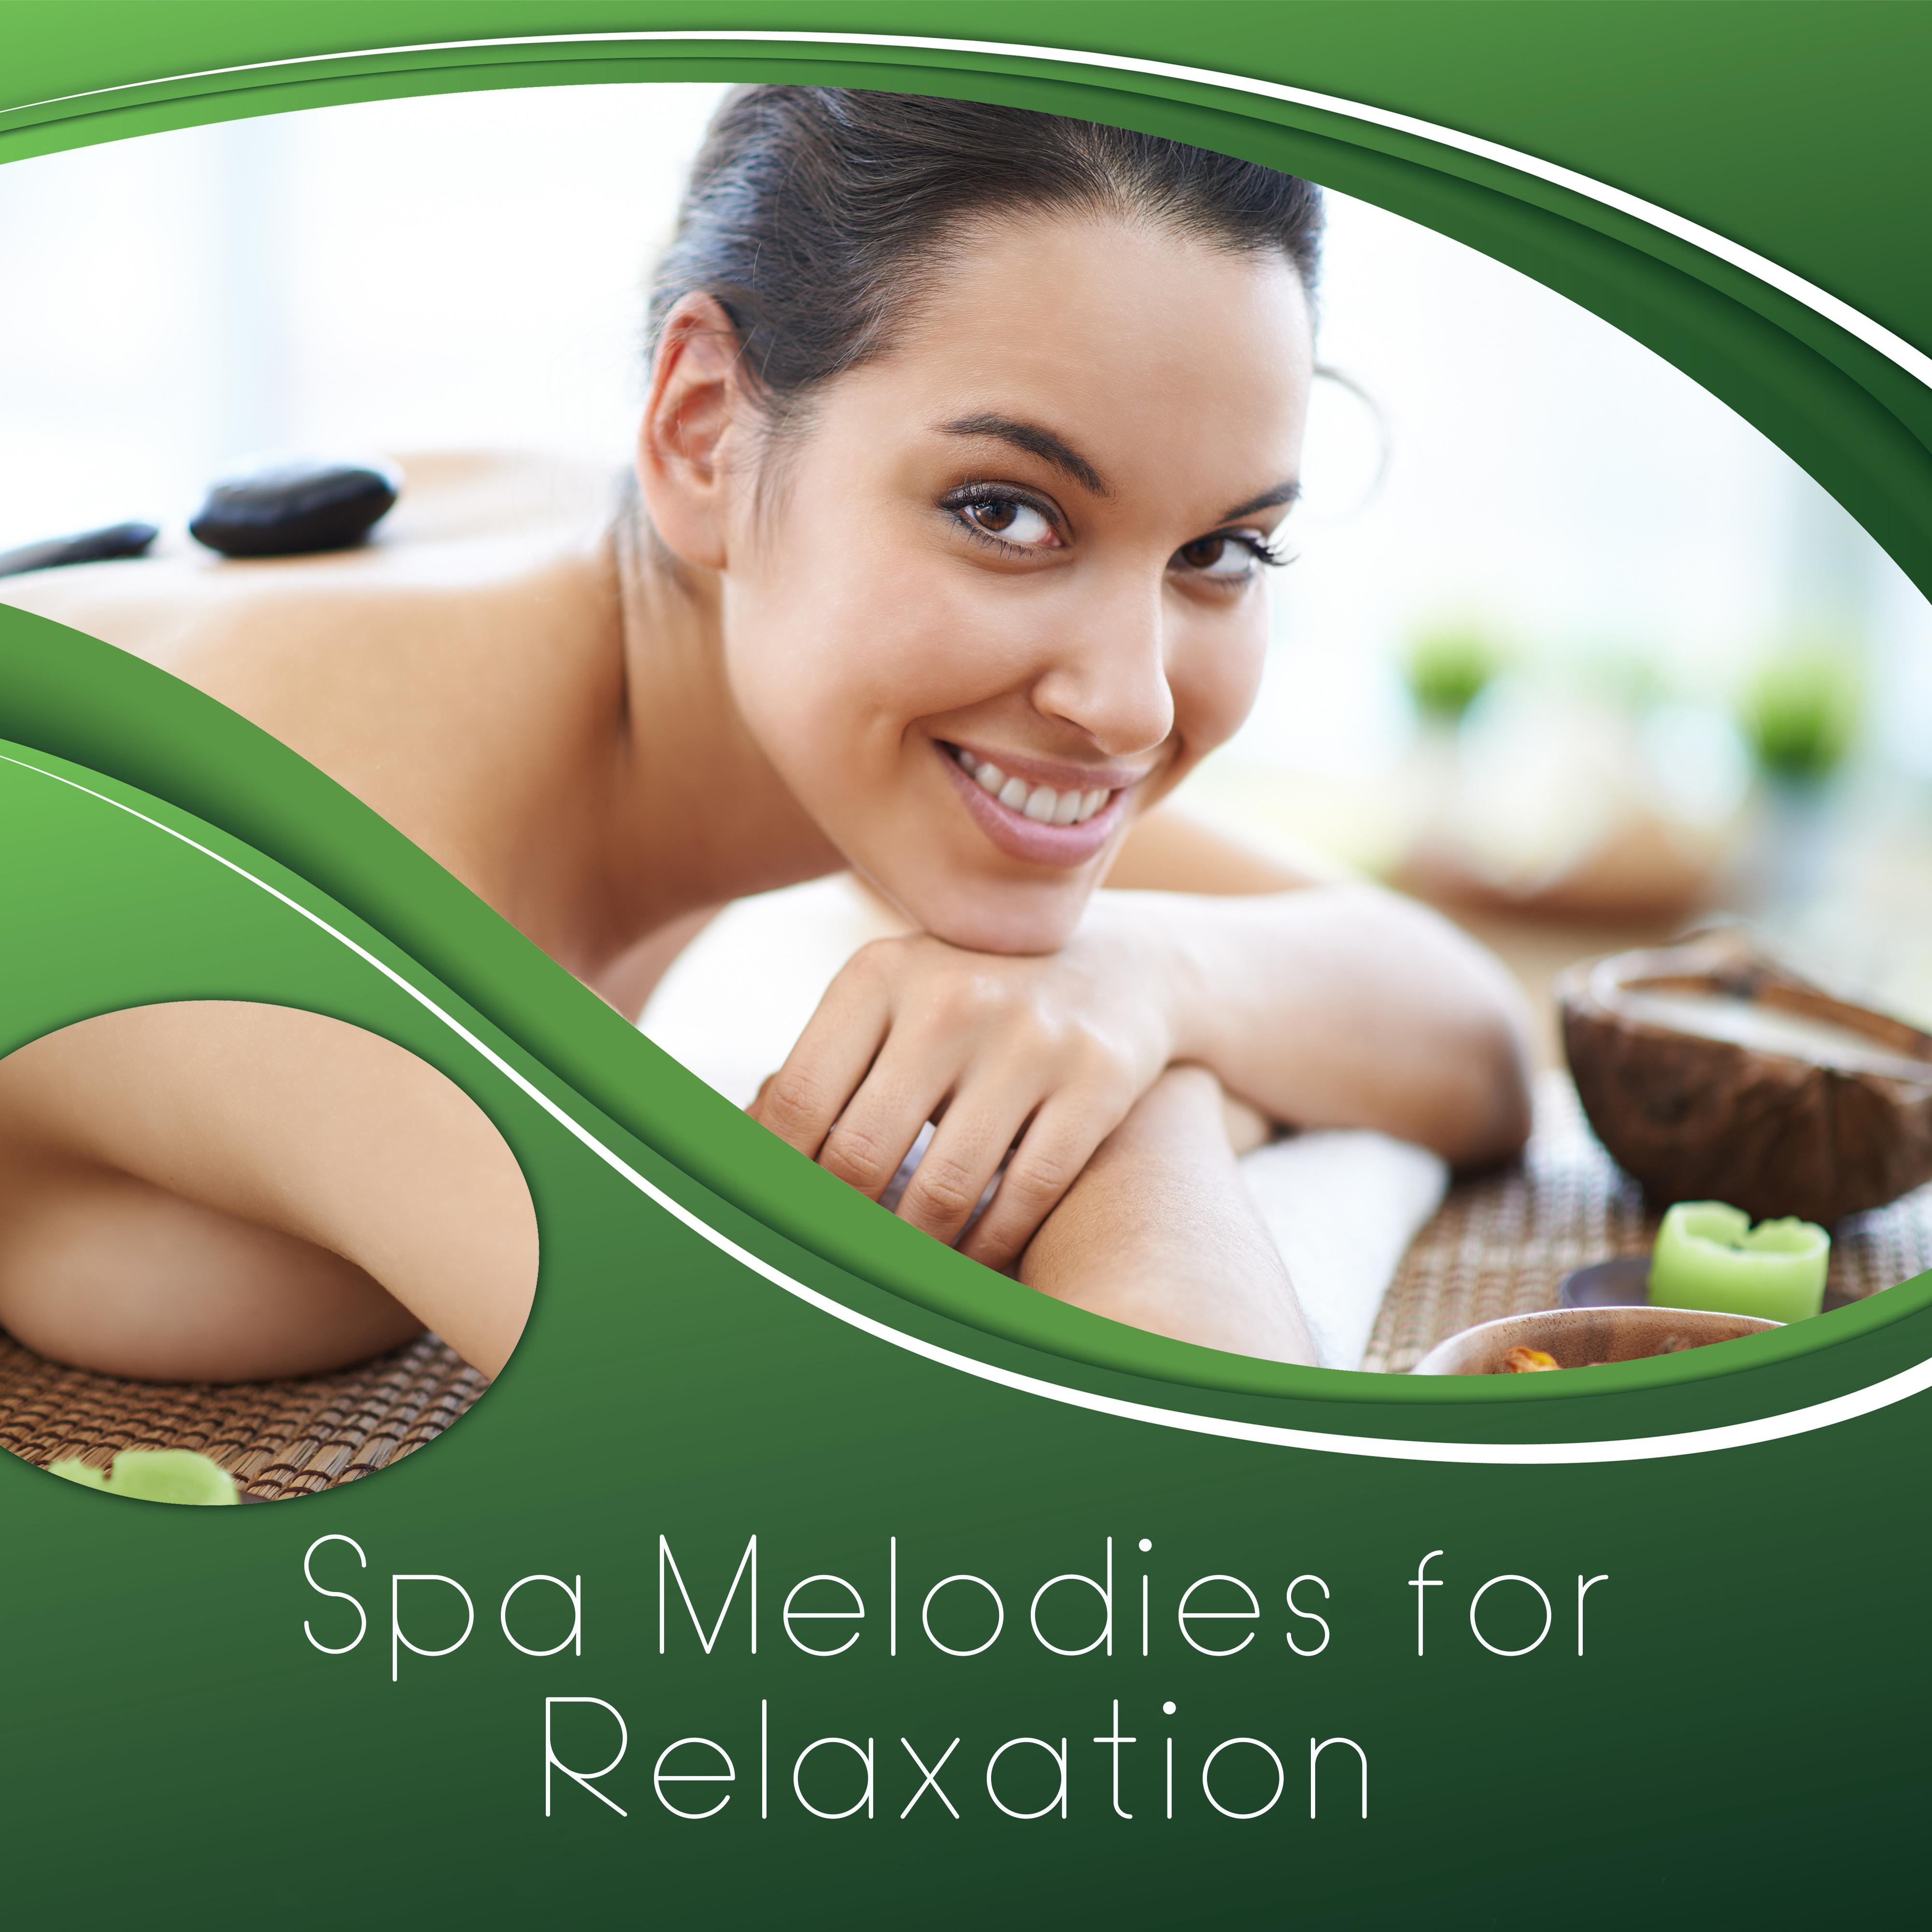 Spa Melodies for Relaxation